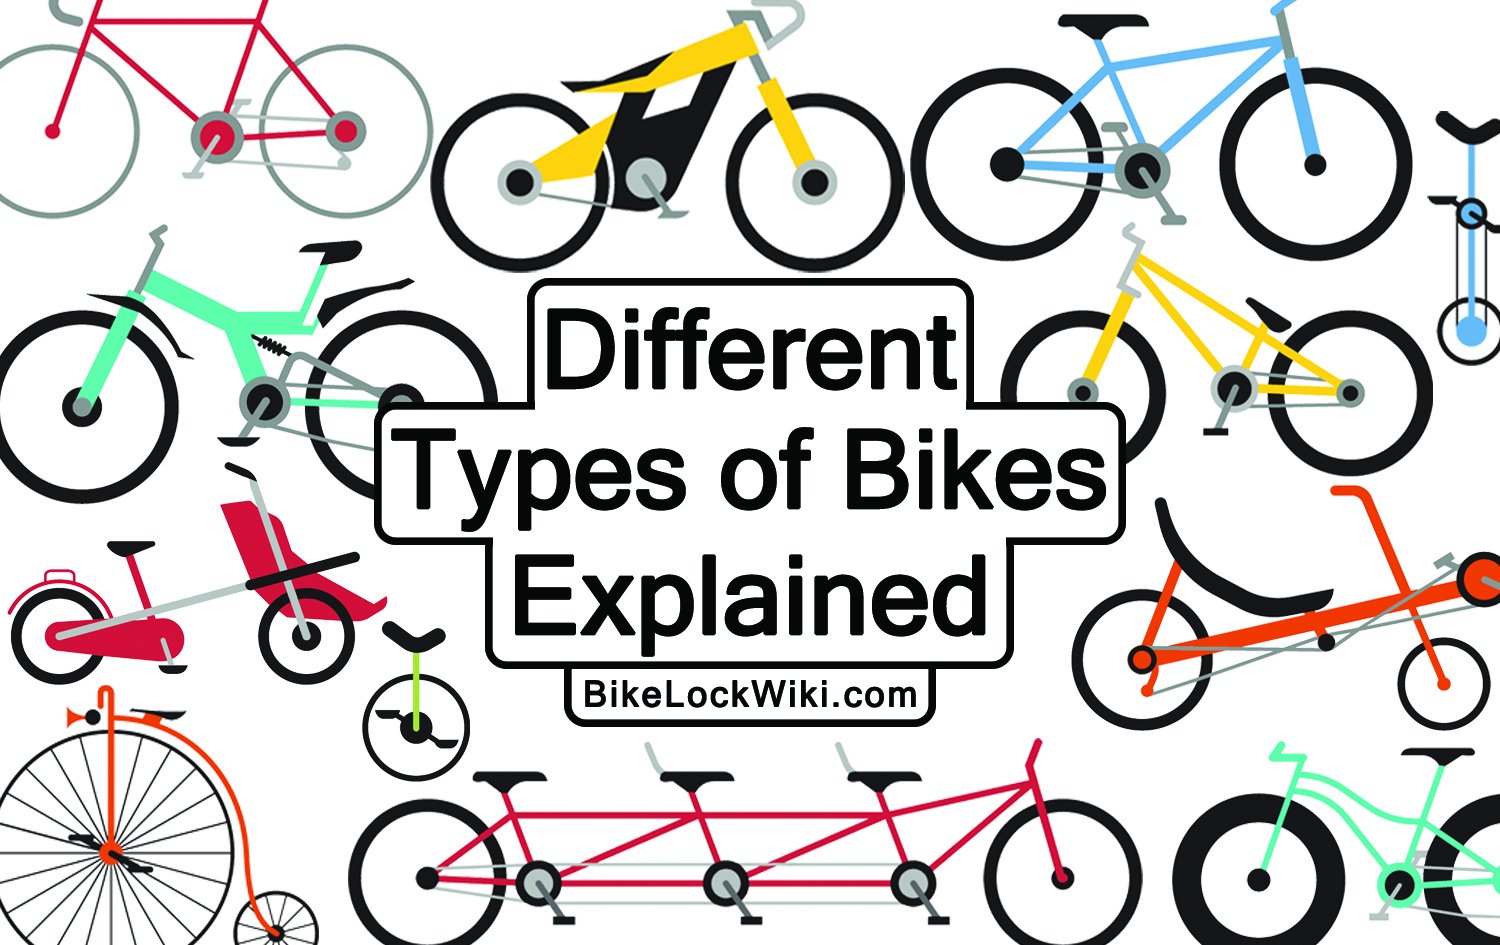 an image displaying many different types of bikes